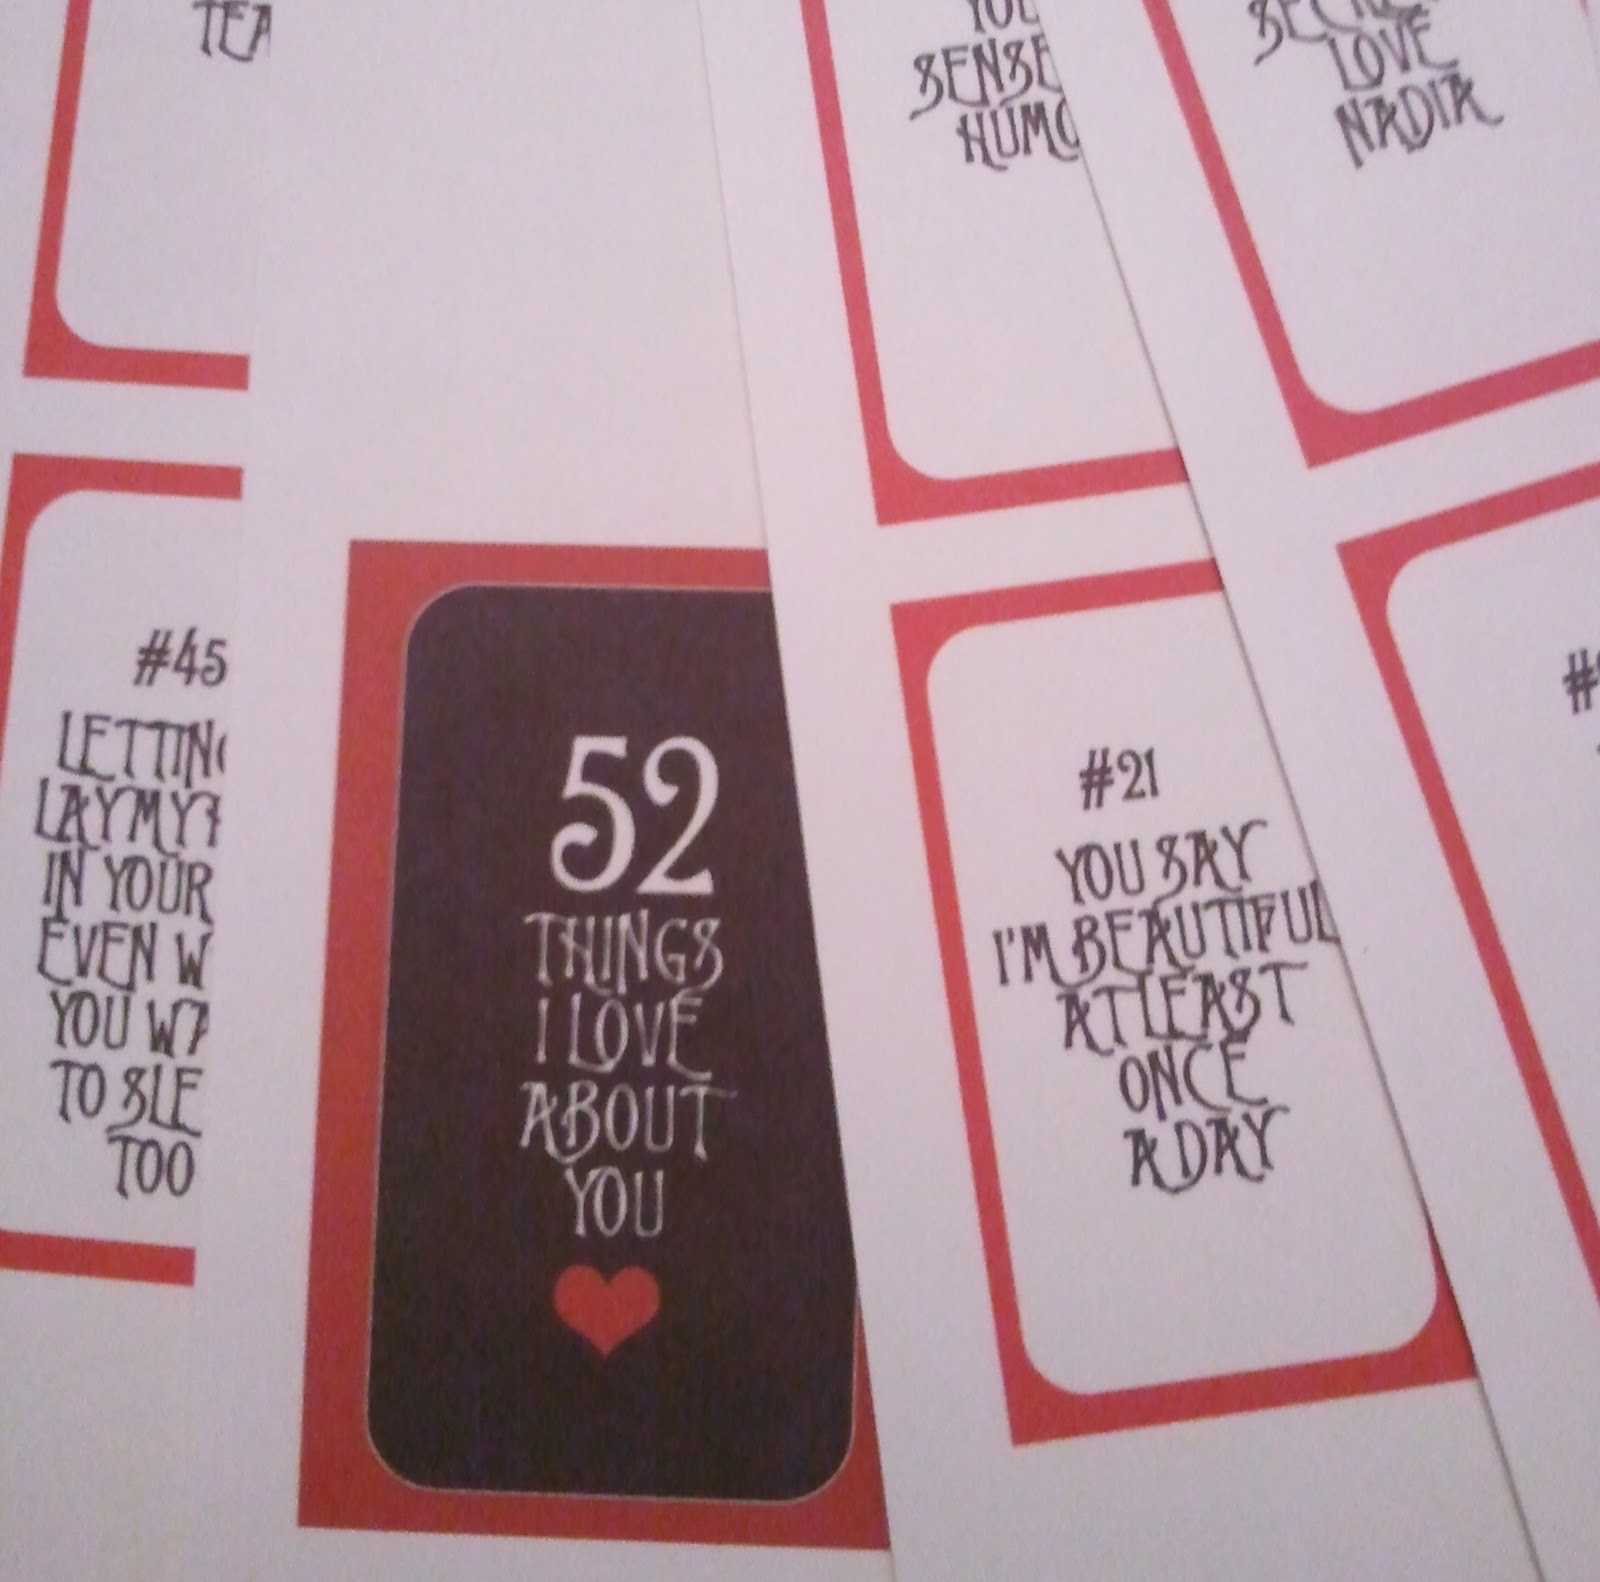 28 Images Of 52 Things Template | Vanscapital For 52 Things I Love About You Cards Template